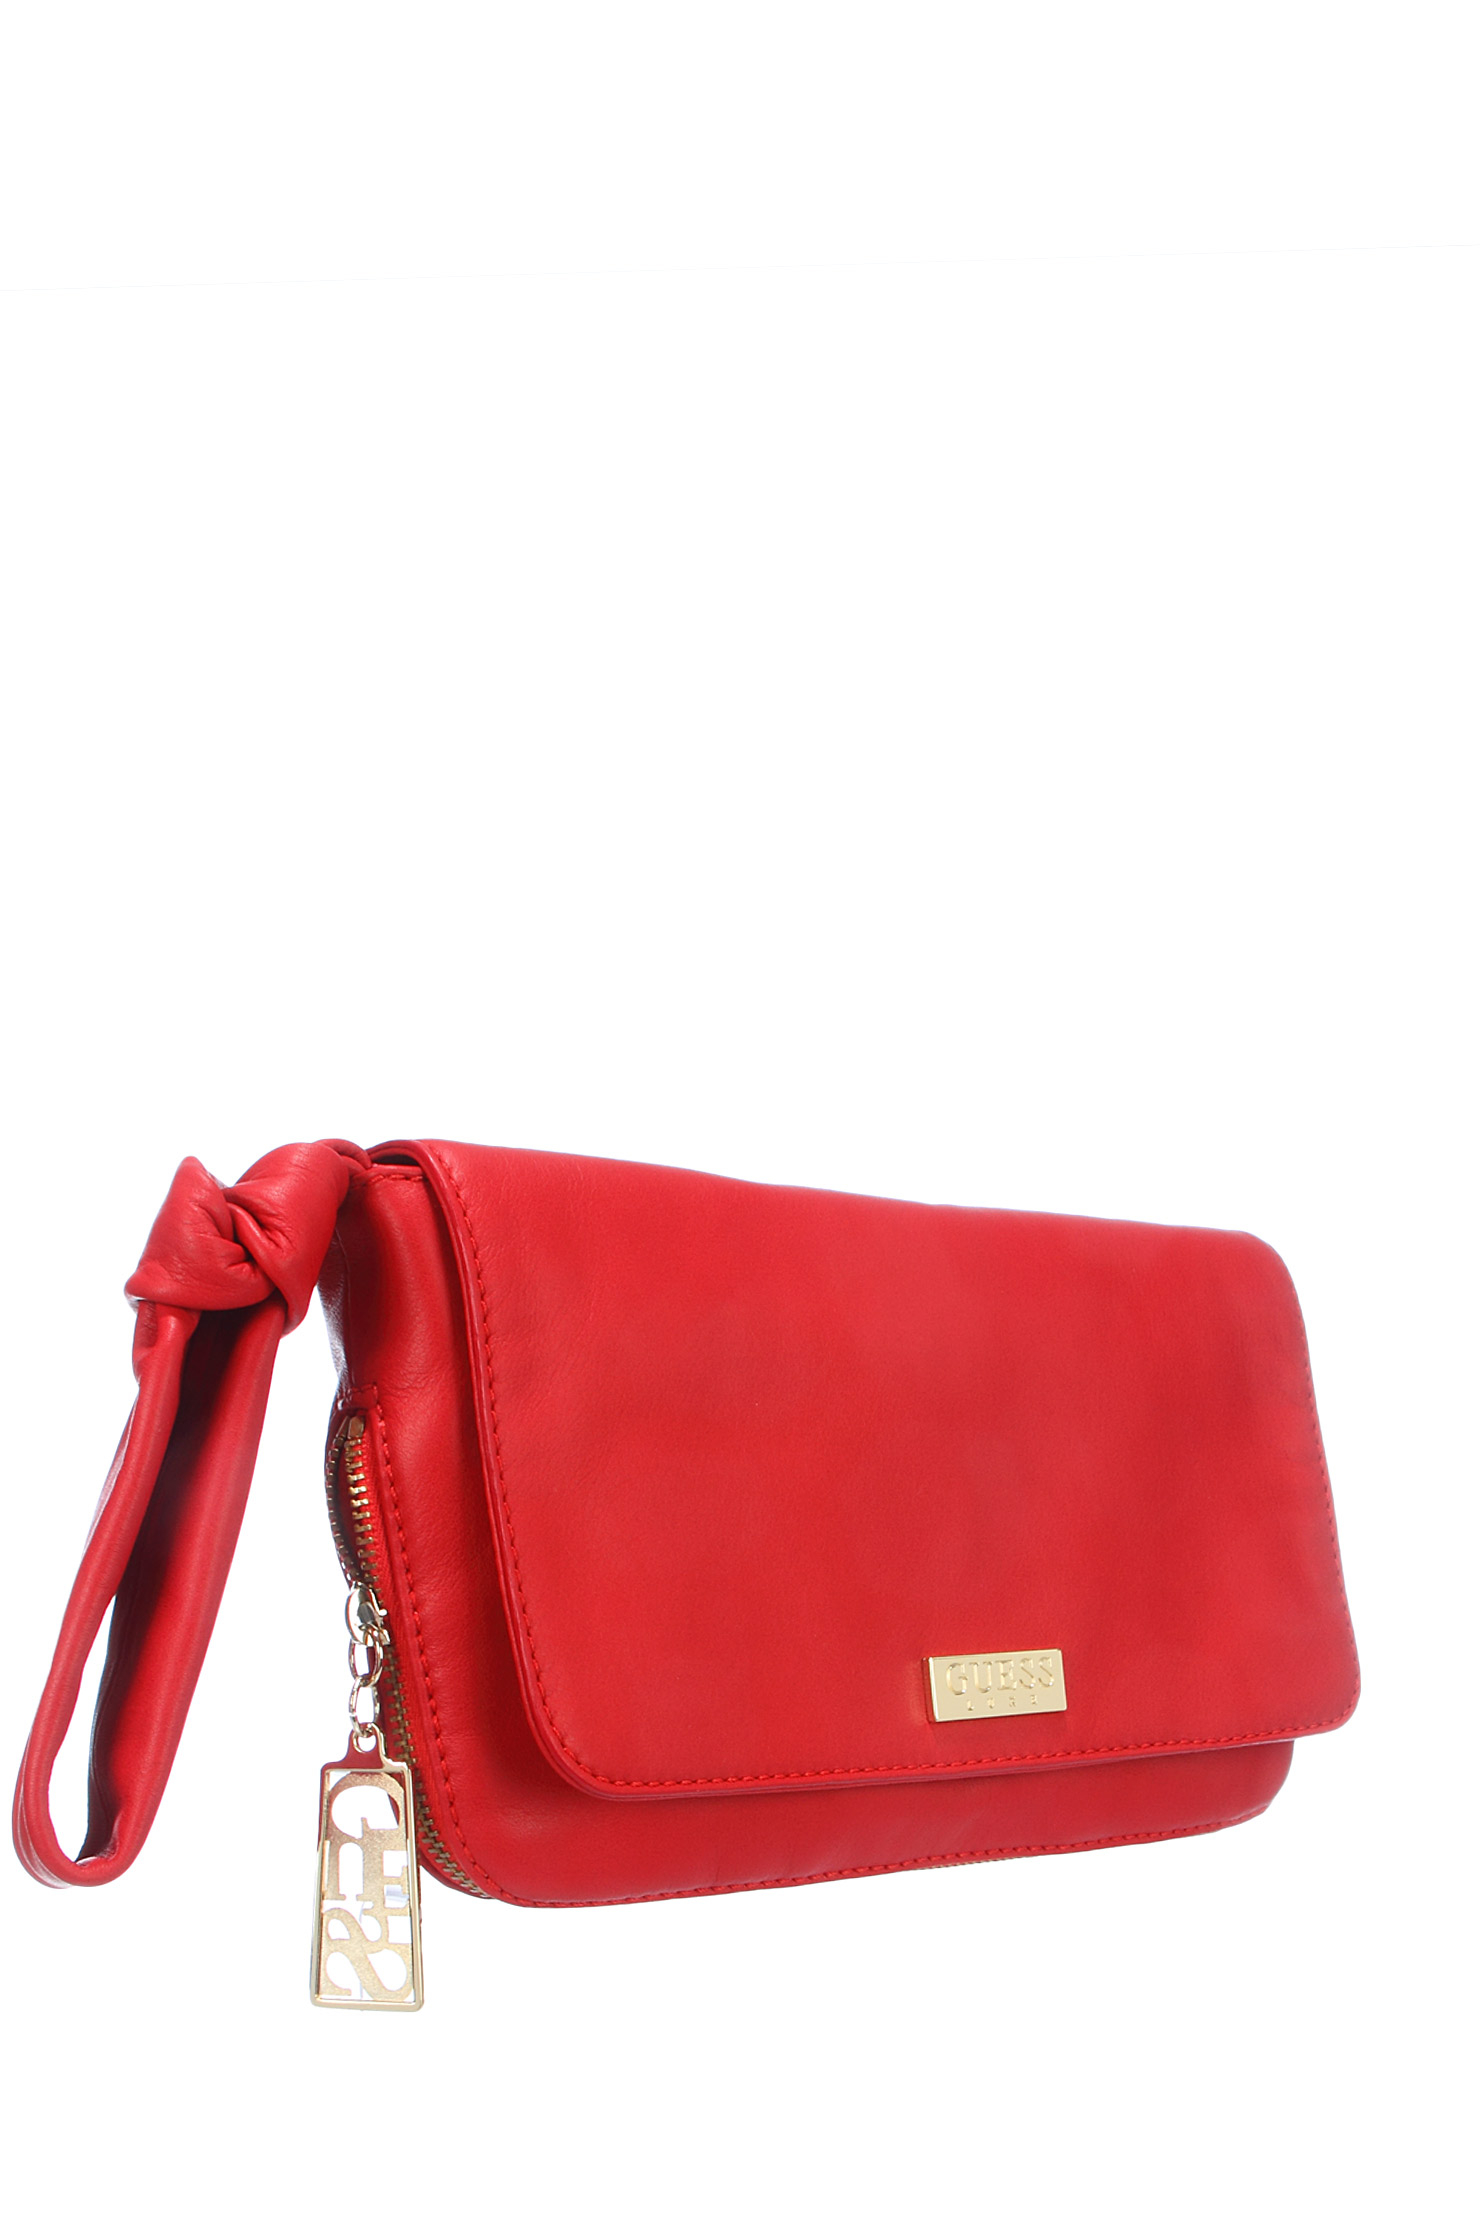 Guess Leather Bag Hwtime in Red | Lyst